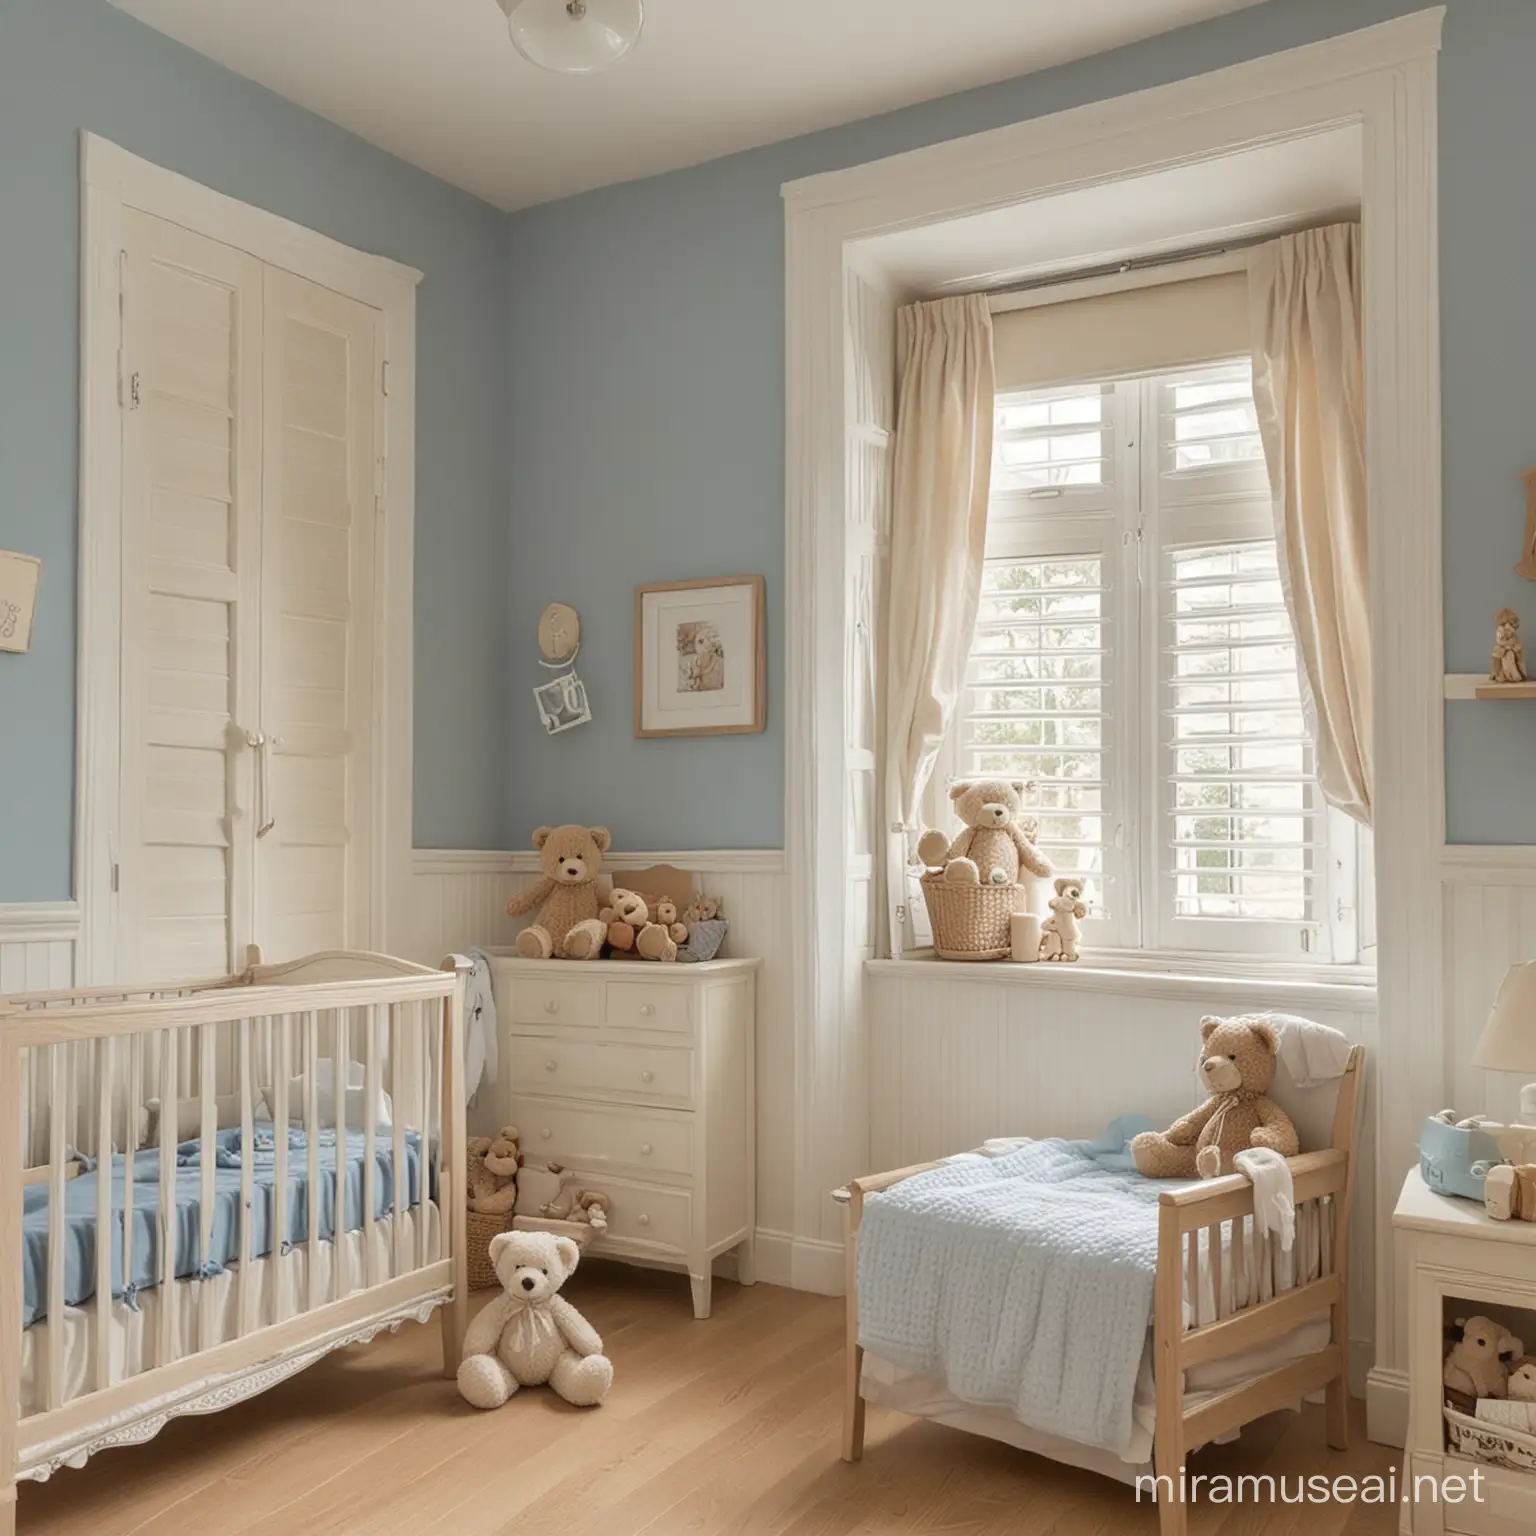 Cozy Baby Boy Room with Oak Furniture and Teddy Bear Accents